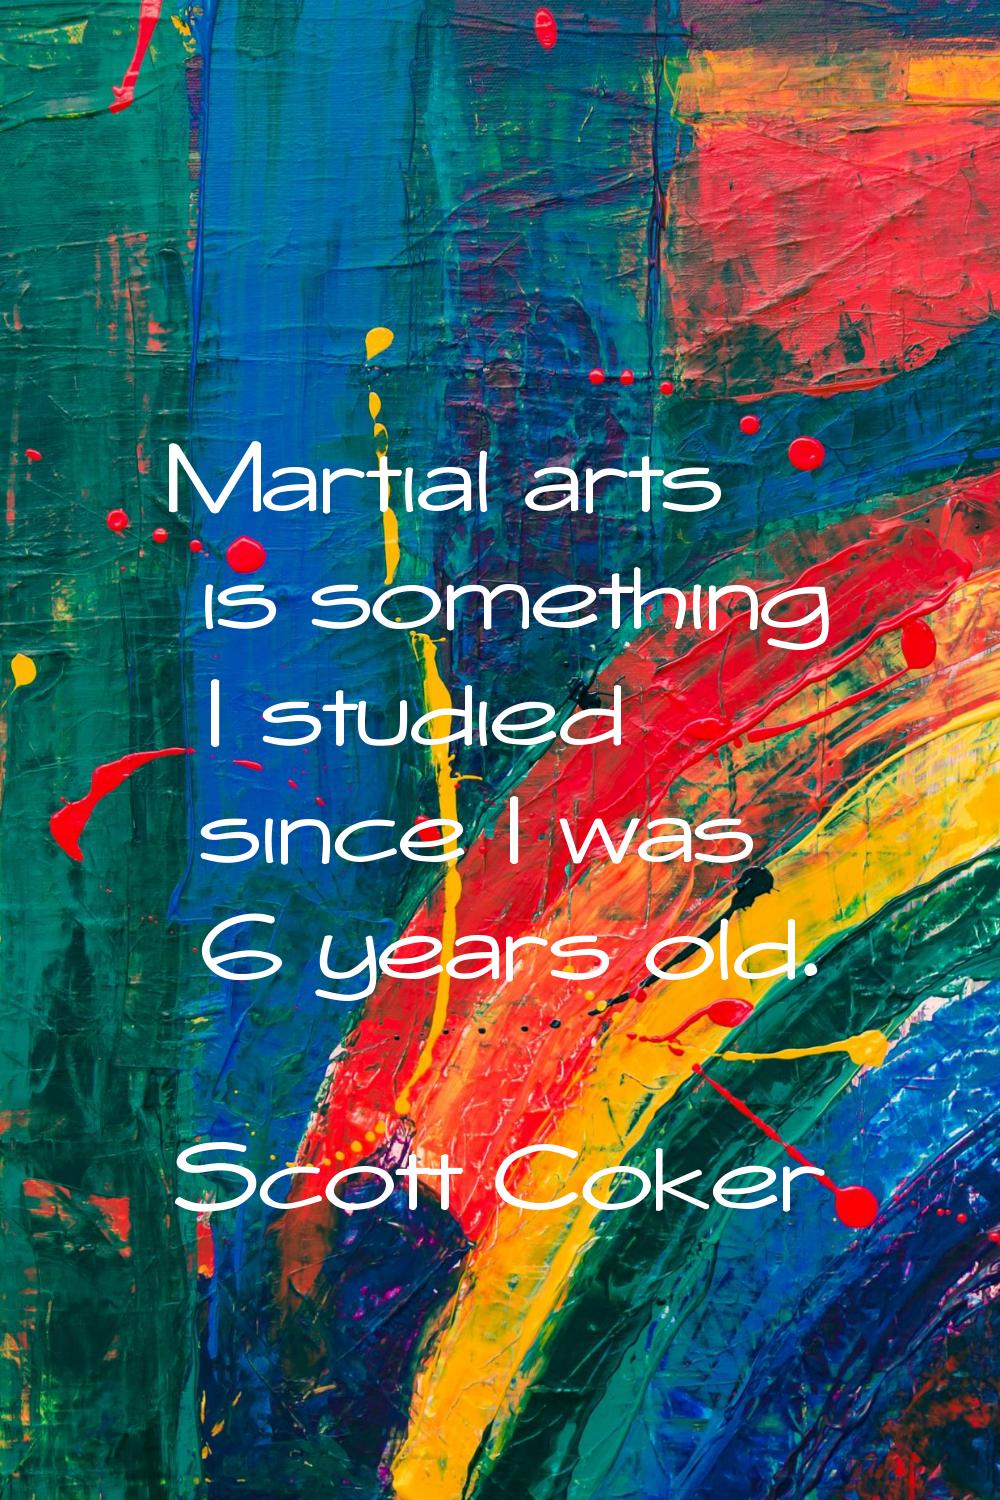 Martial arts is something I studied since I was 6 years old.